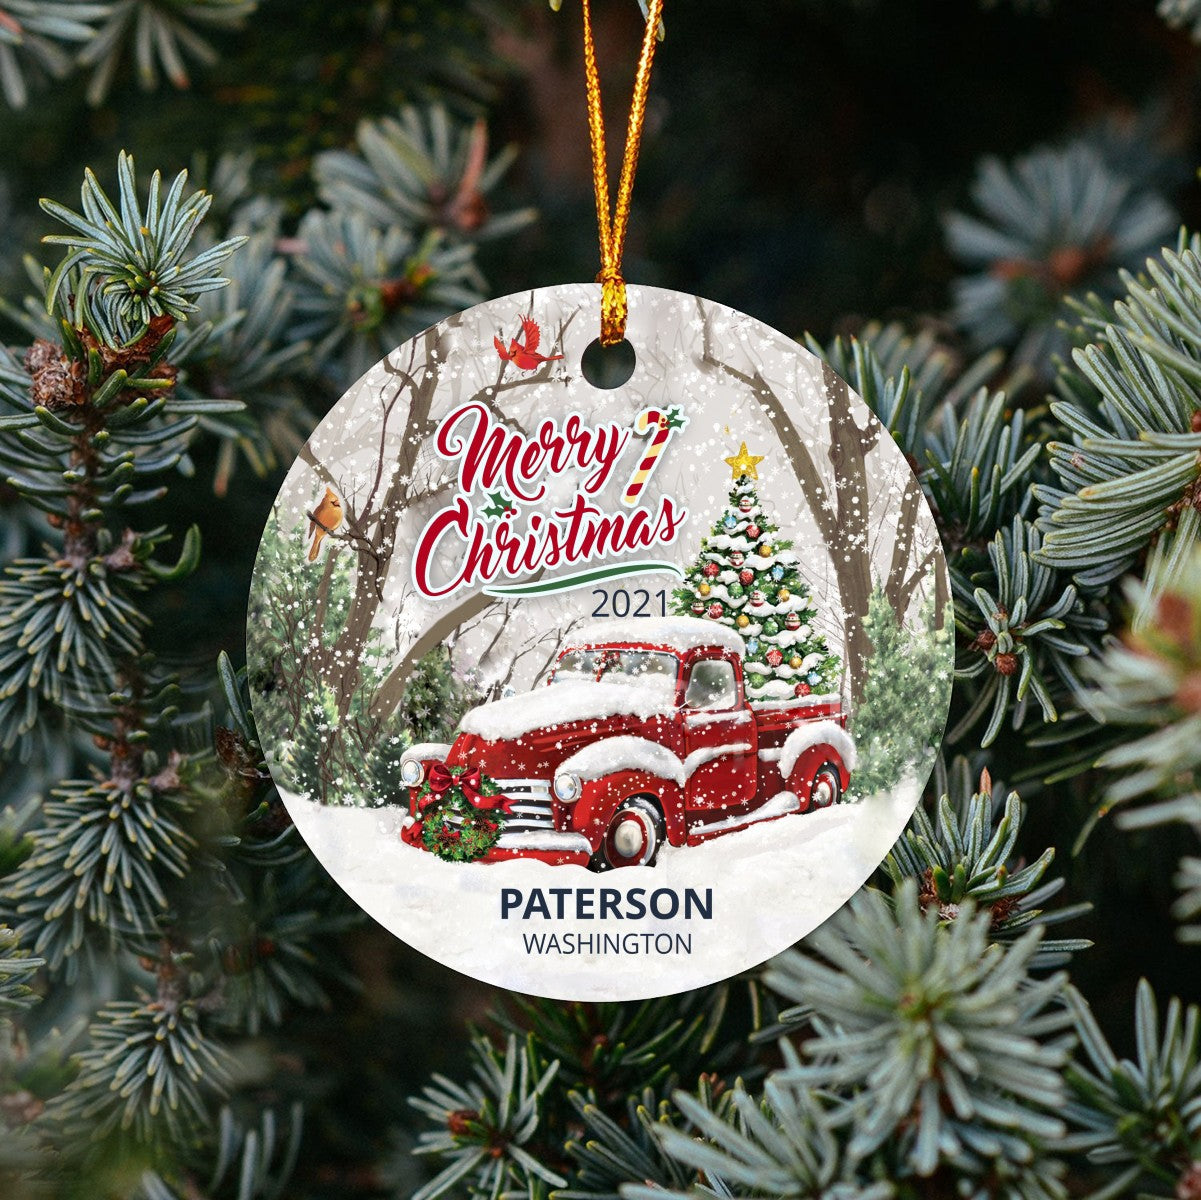 Christmas Tree Ornaments Paterson - Ornament With Name City, State Paterson Washington WA Ornament - Red Truck Xmas Ornaments 3'' Plastic Gift For Family, Friend And Housewarming